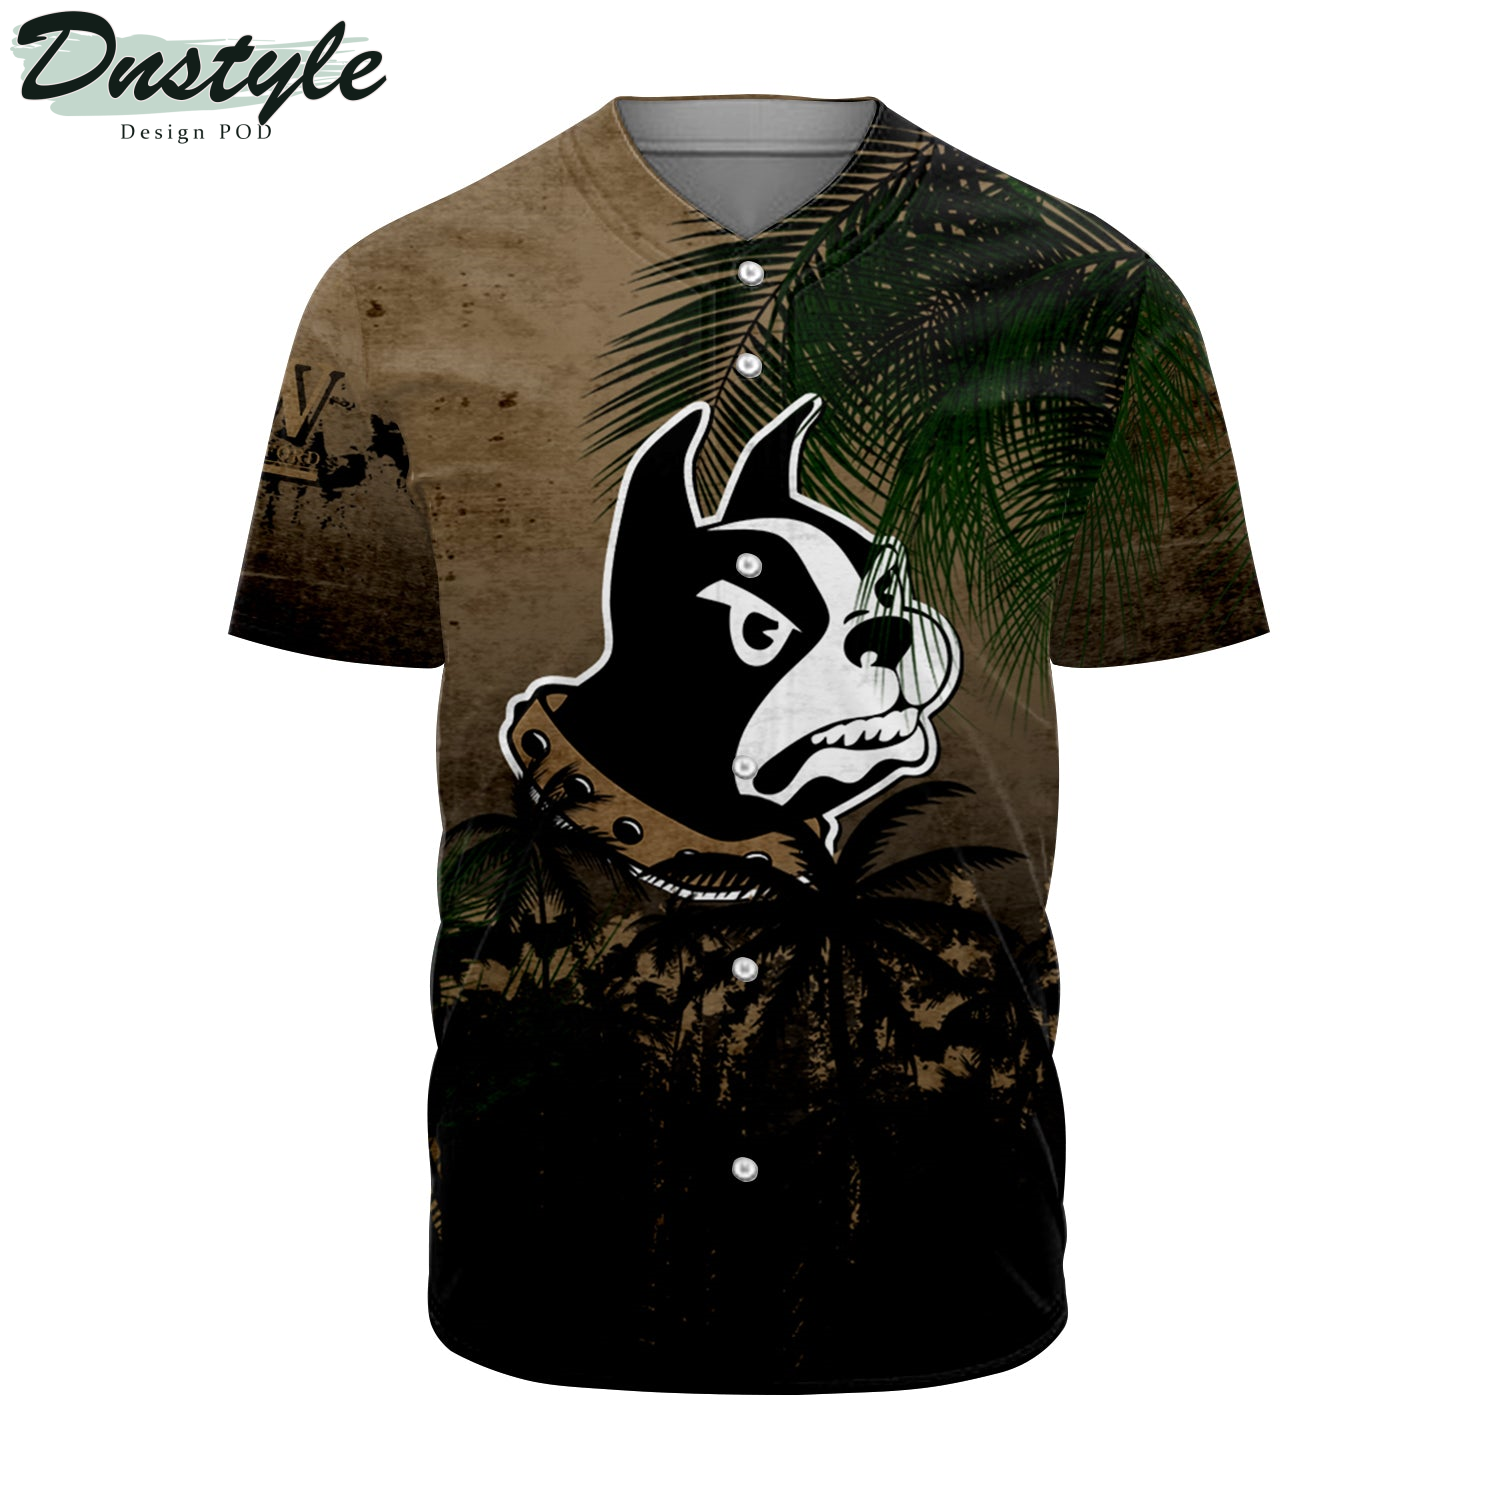 Wofford Terriers Baseball Jersey Coconut Tree Tropical Grunge